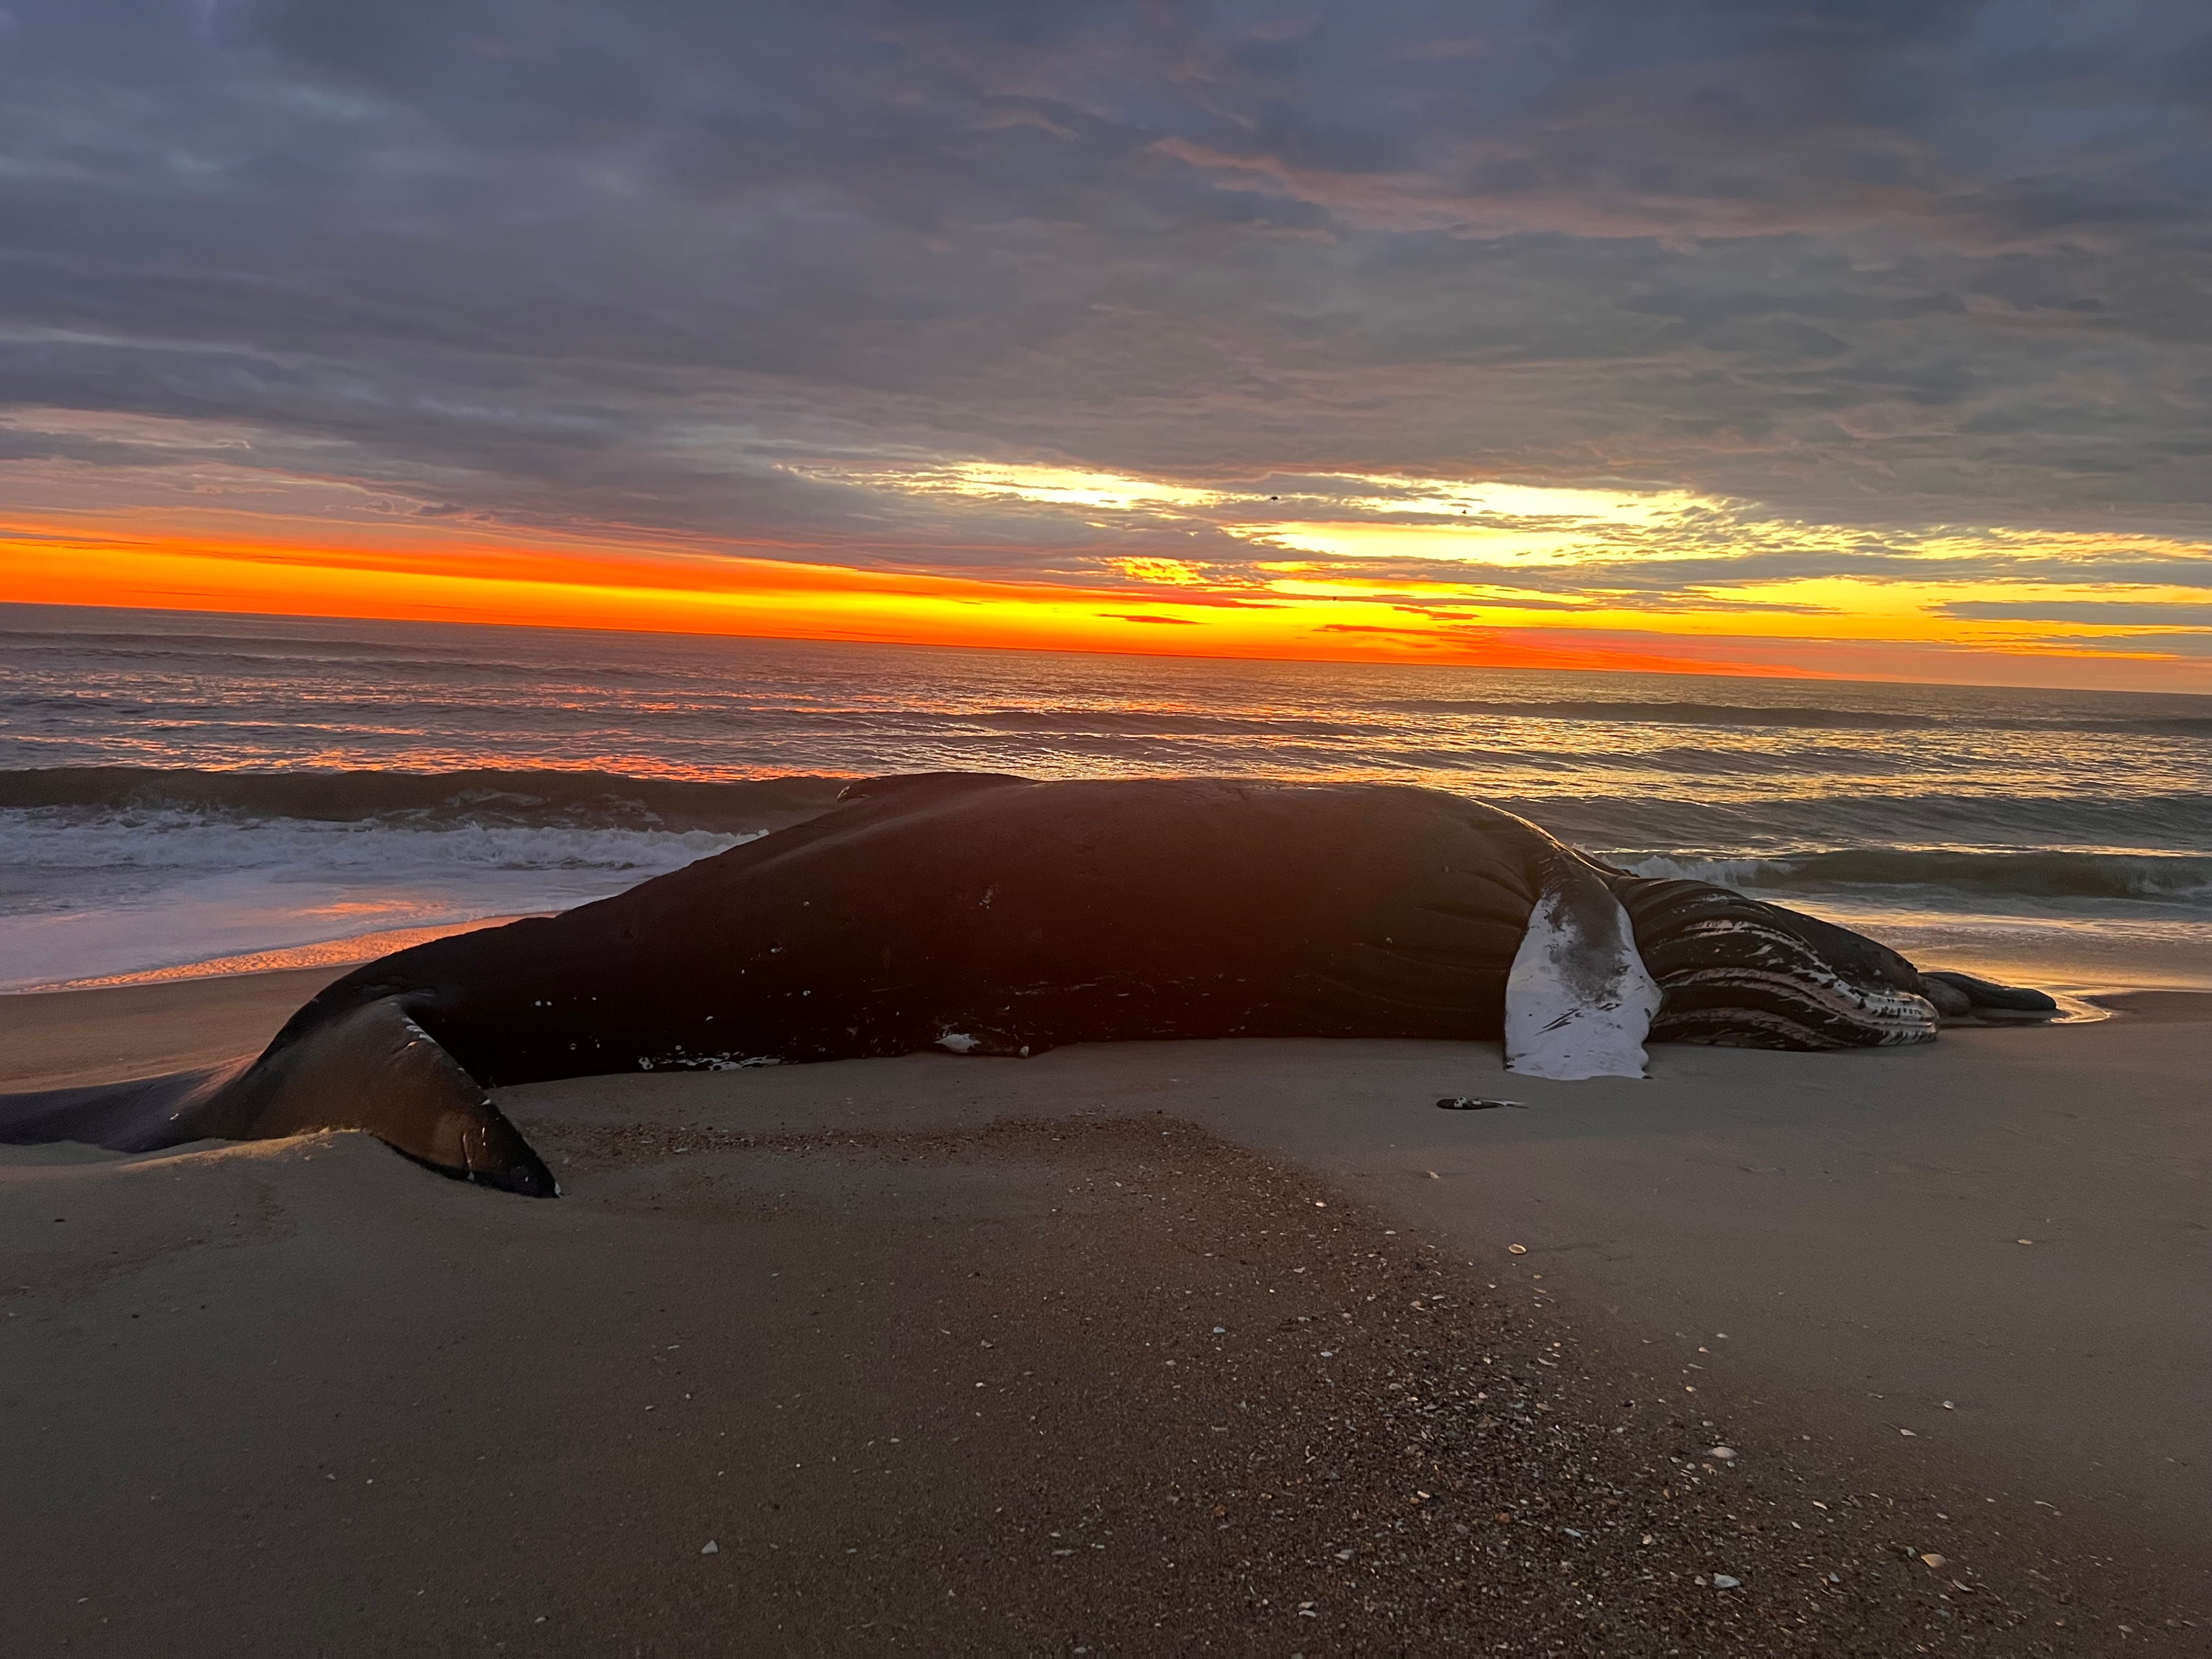 Dead whales keep washing up along the East Coast. What's going on?